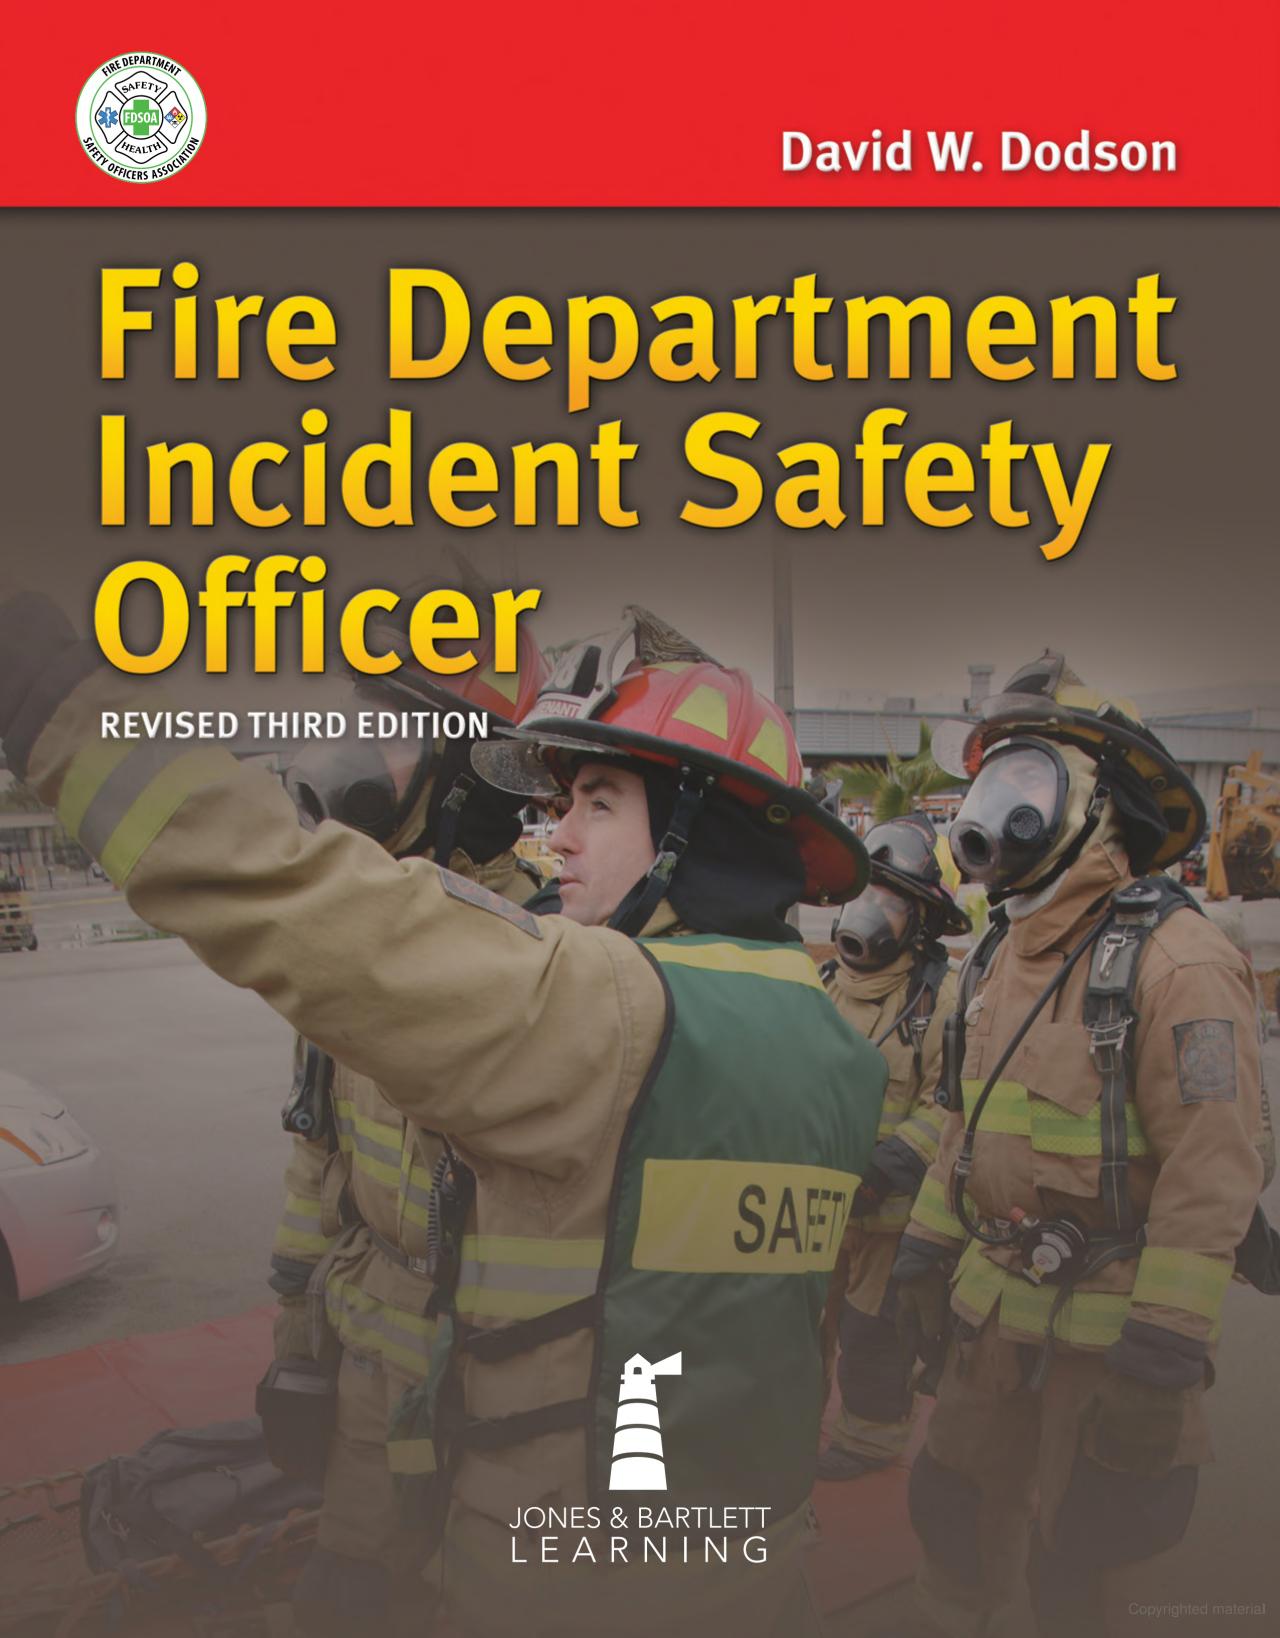 Fire Department Incident Safety Officer REVISED